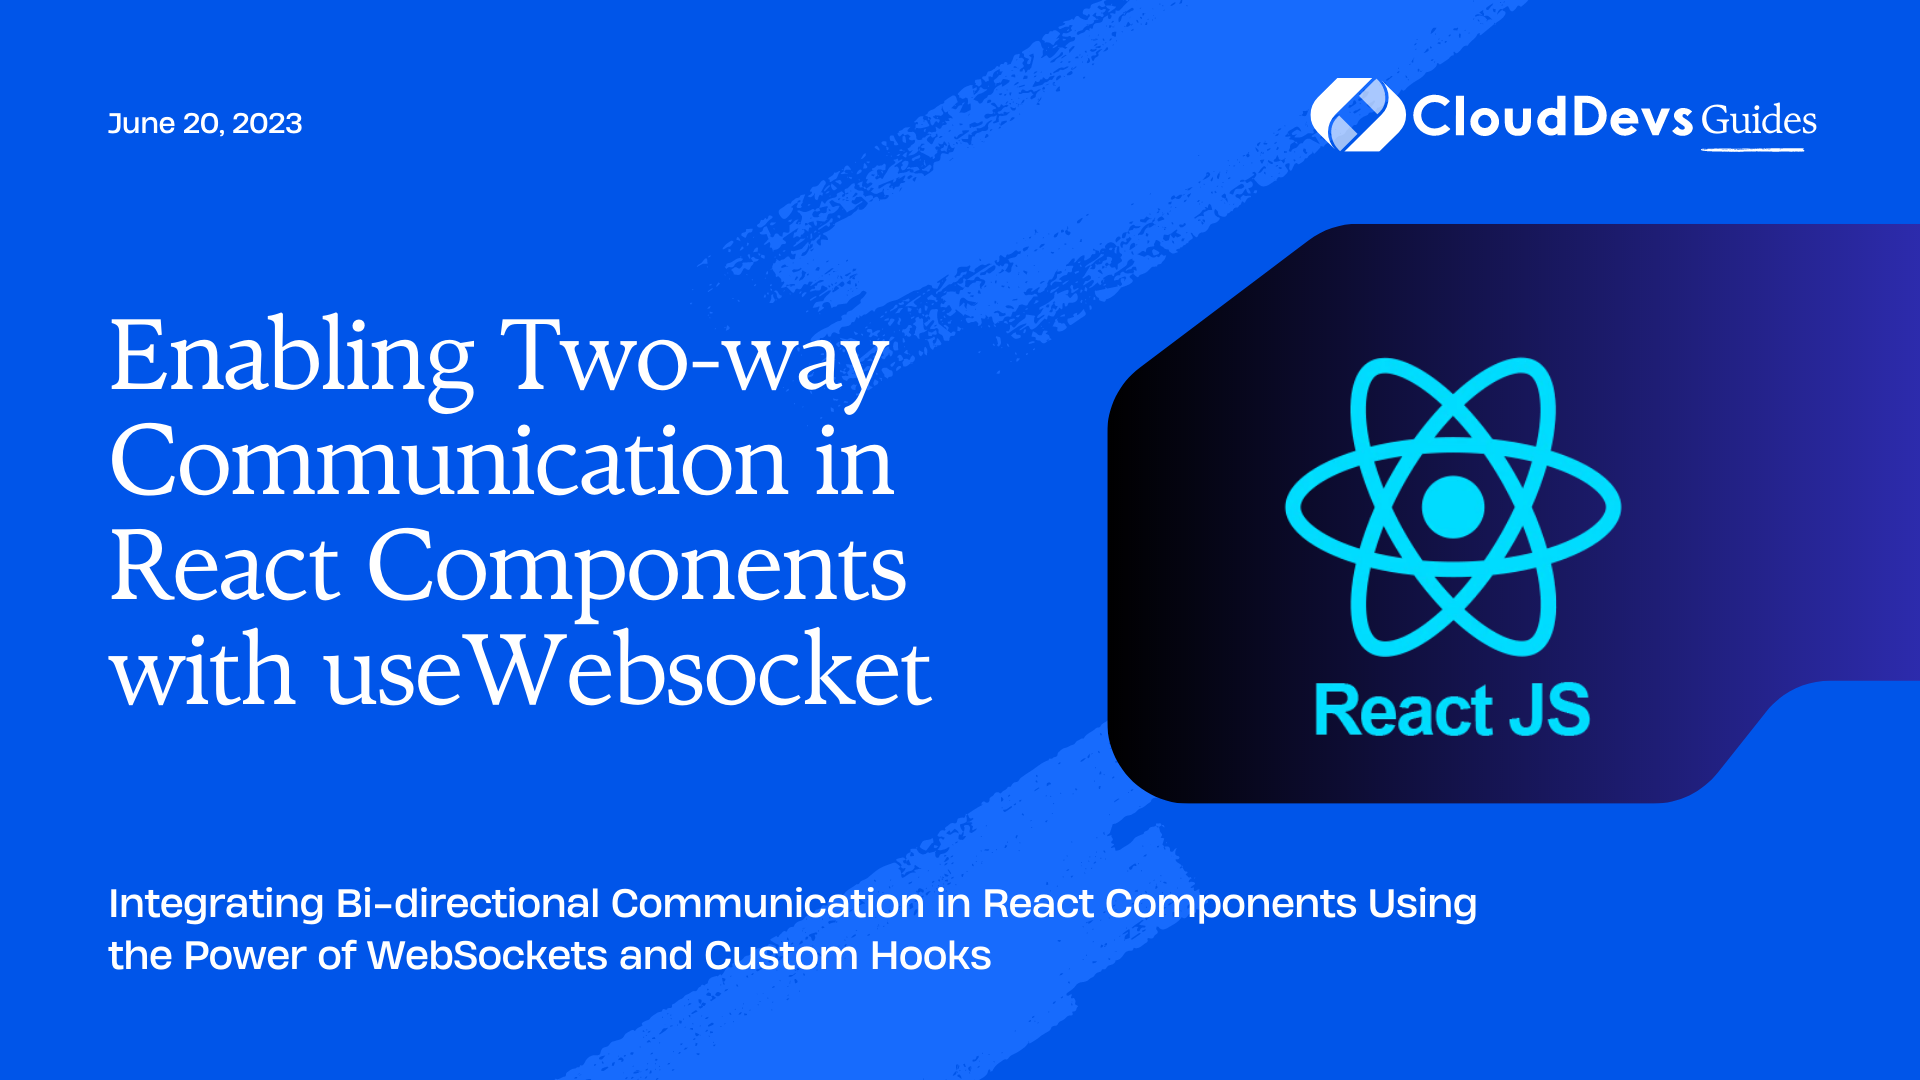 Enabling Two-way Communication in React Components with useWebsocket